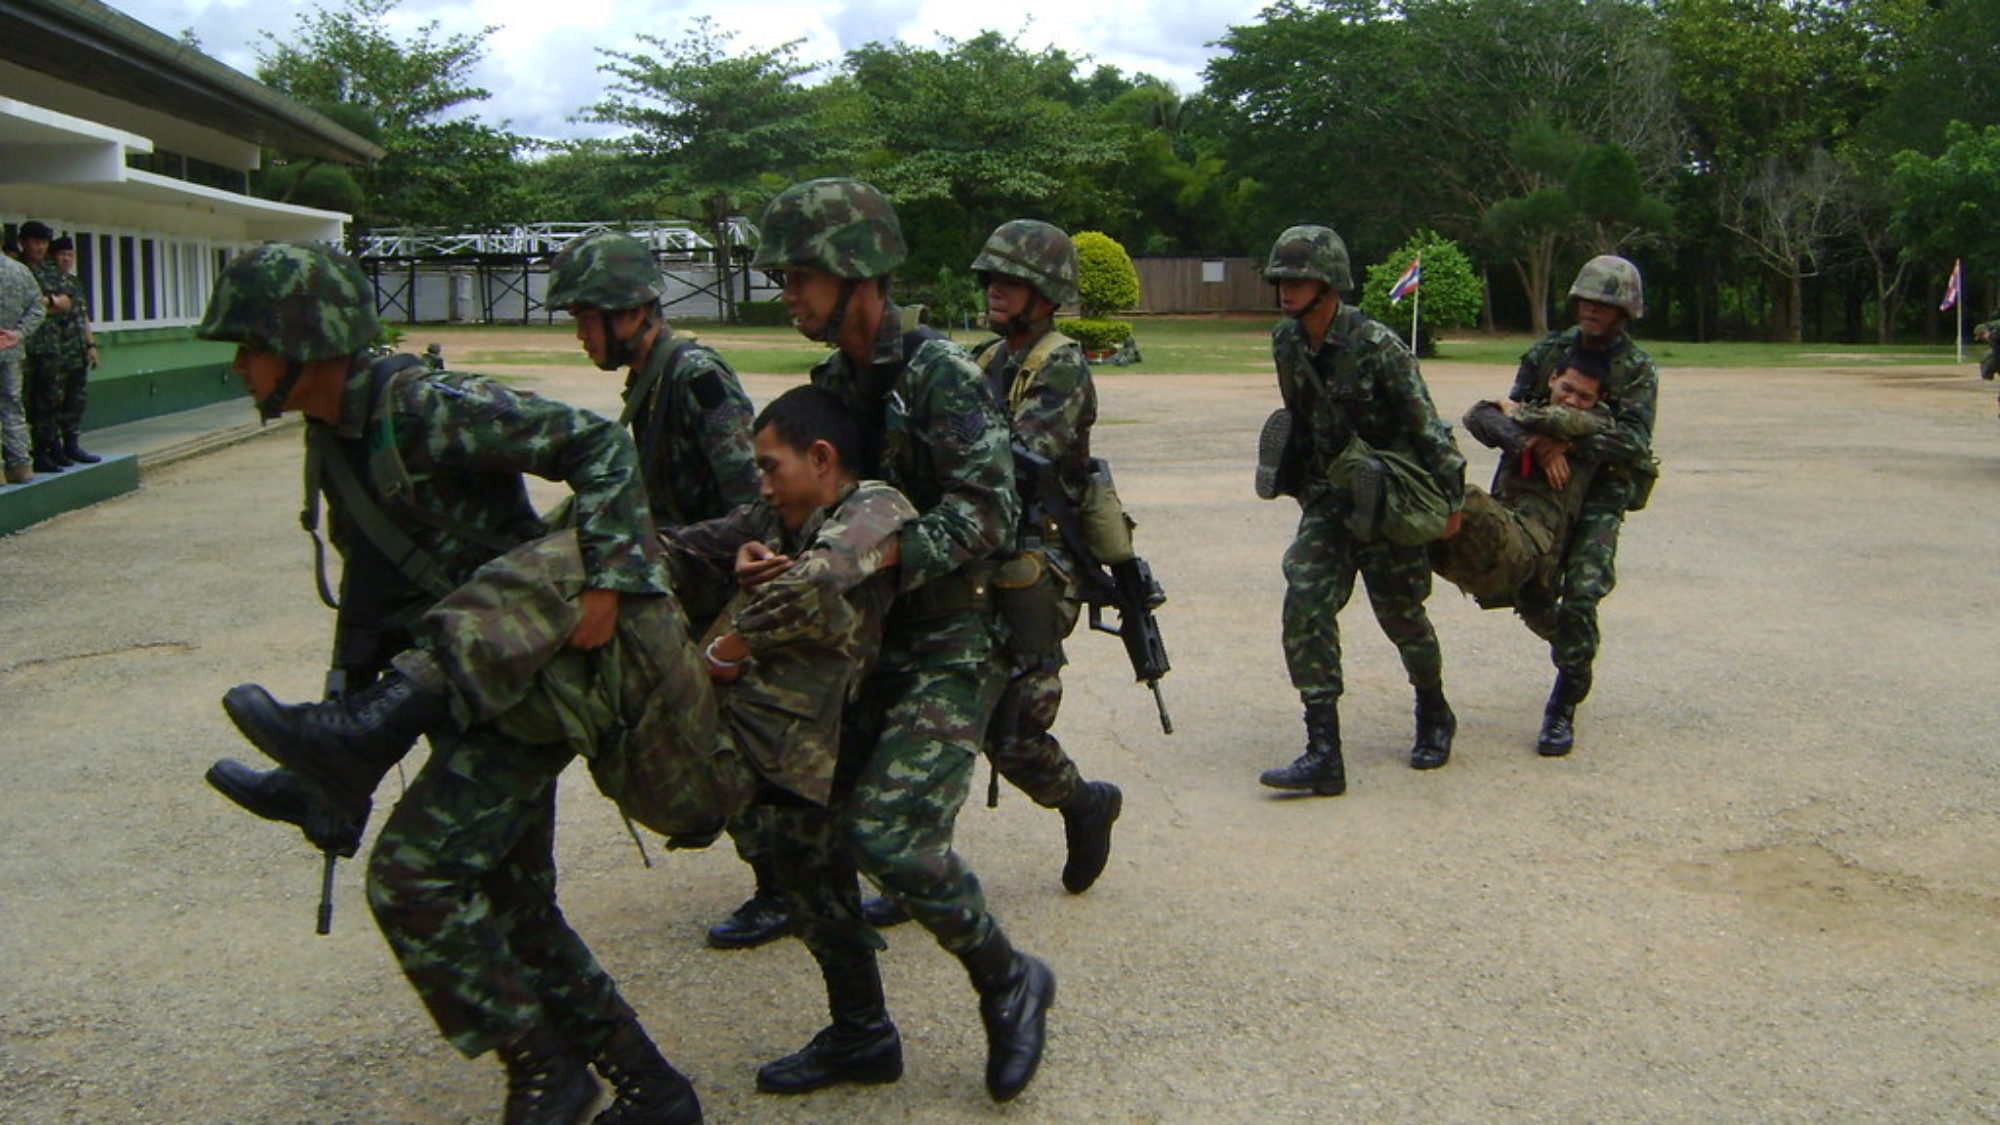 Thai soldiers practicing counterinsurgency training. Several men in Thai military uniform carrying another man in uniform.